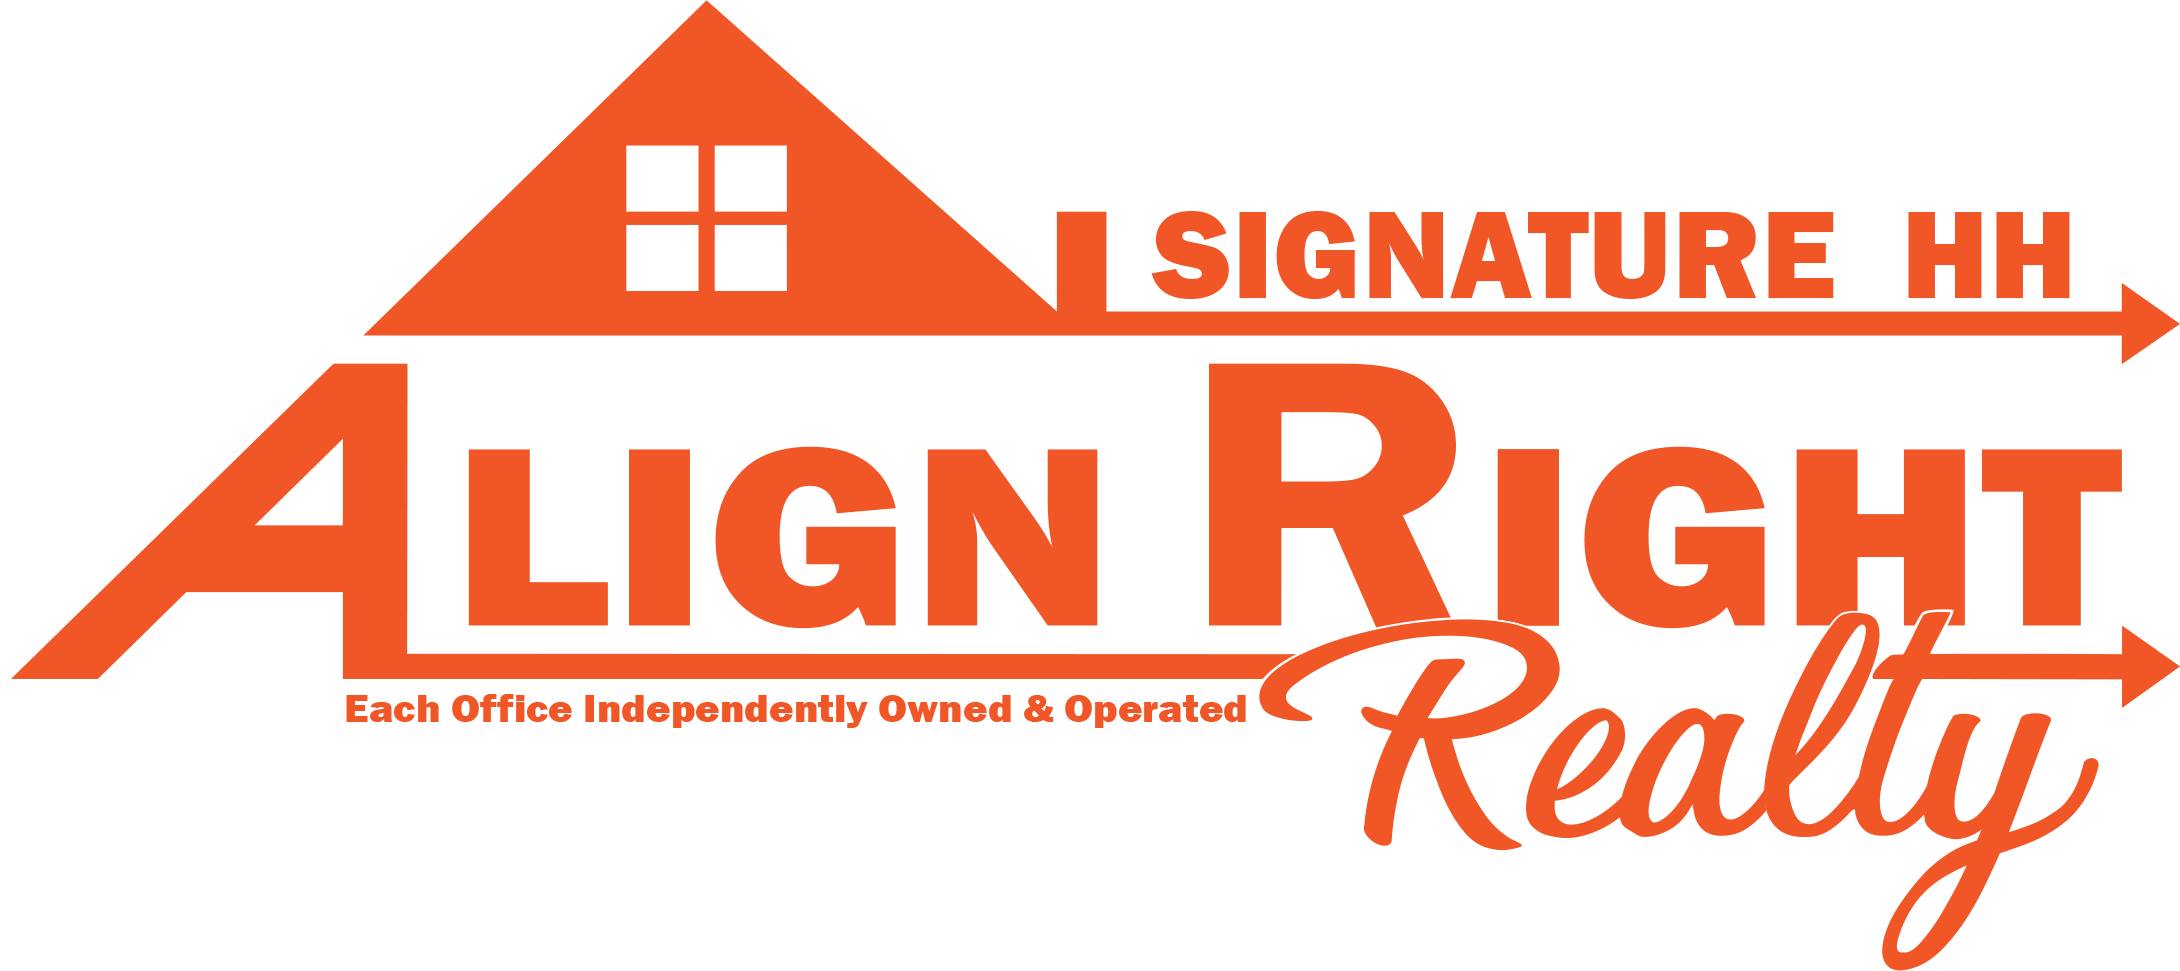 Align Right Realty Signature HH